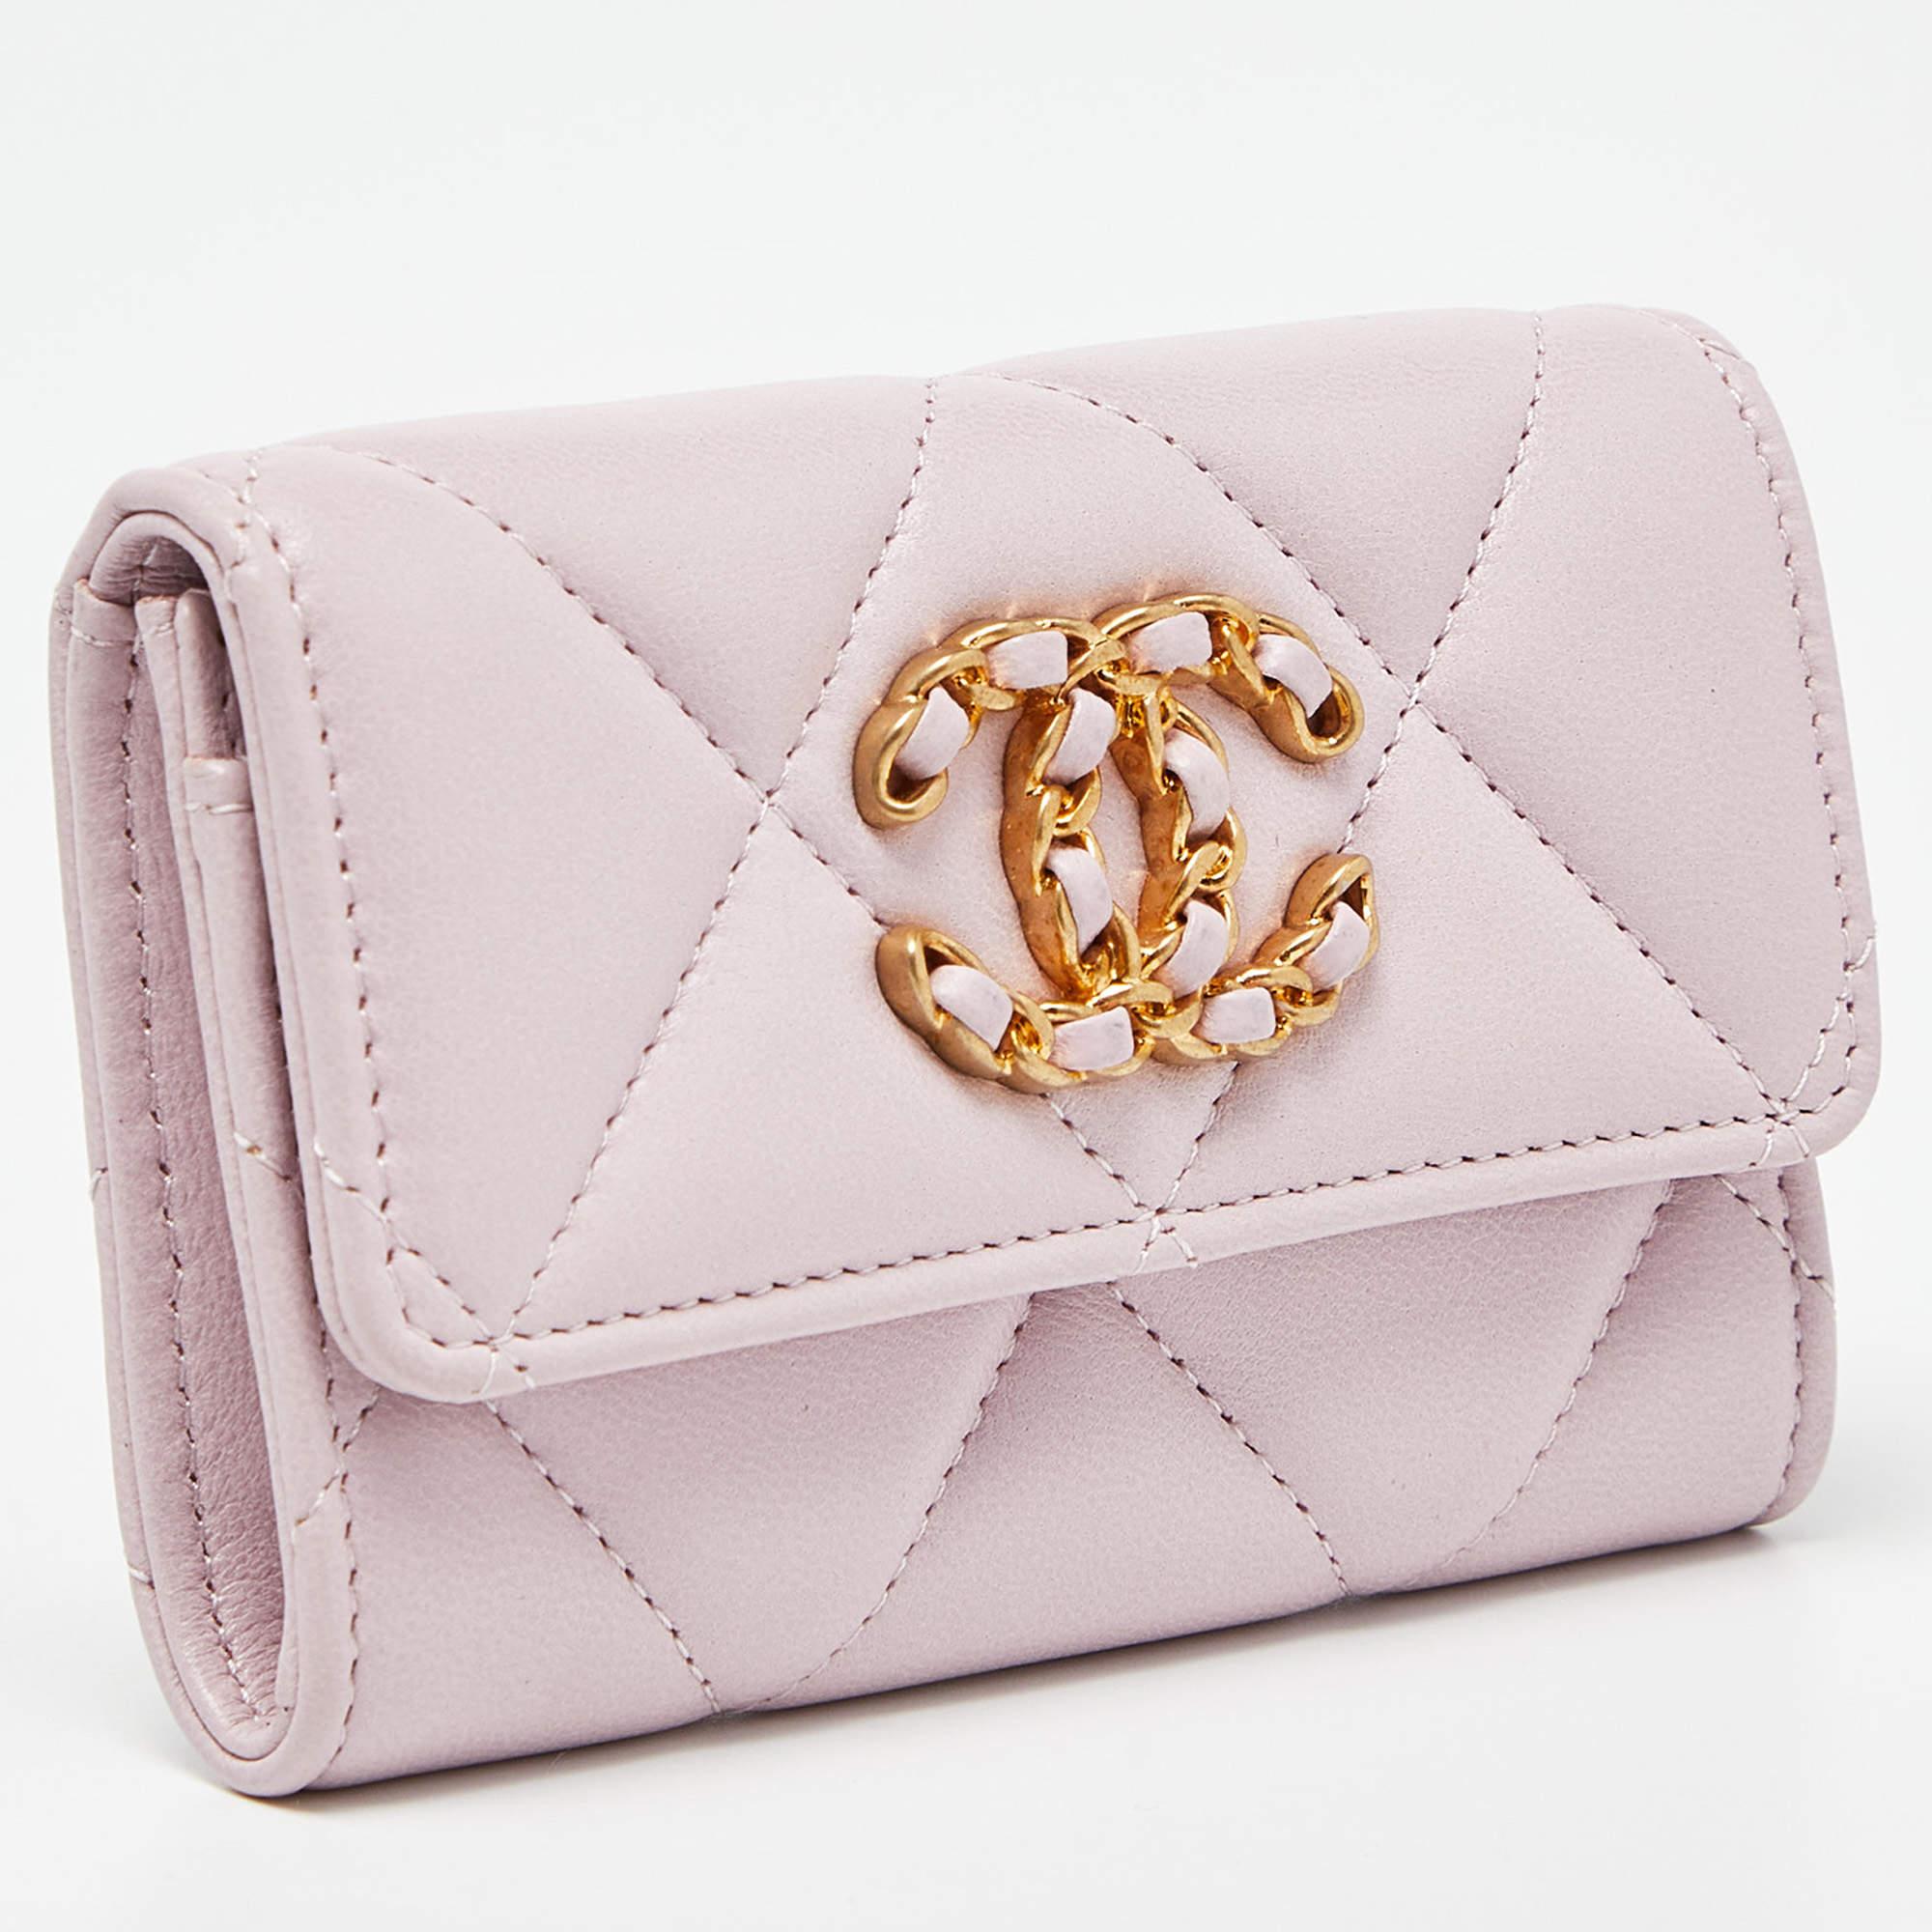 The Chanel 19 Card Case is a luxurious accessory crafted from soft, quilted leather in a stunning shade of pink. It features the iconic Chanel logo on the front and offers ample space for organizing cards while exuding elegance and sophistication.

